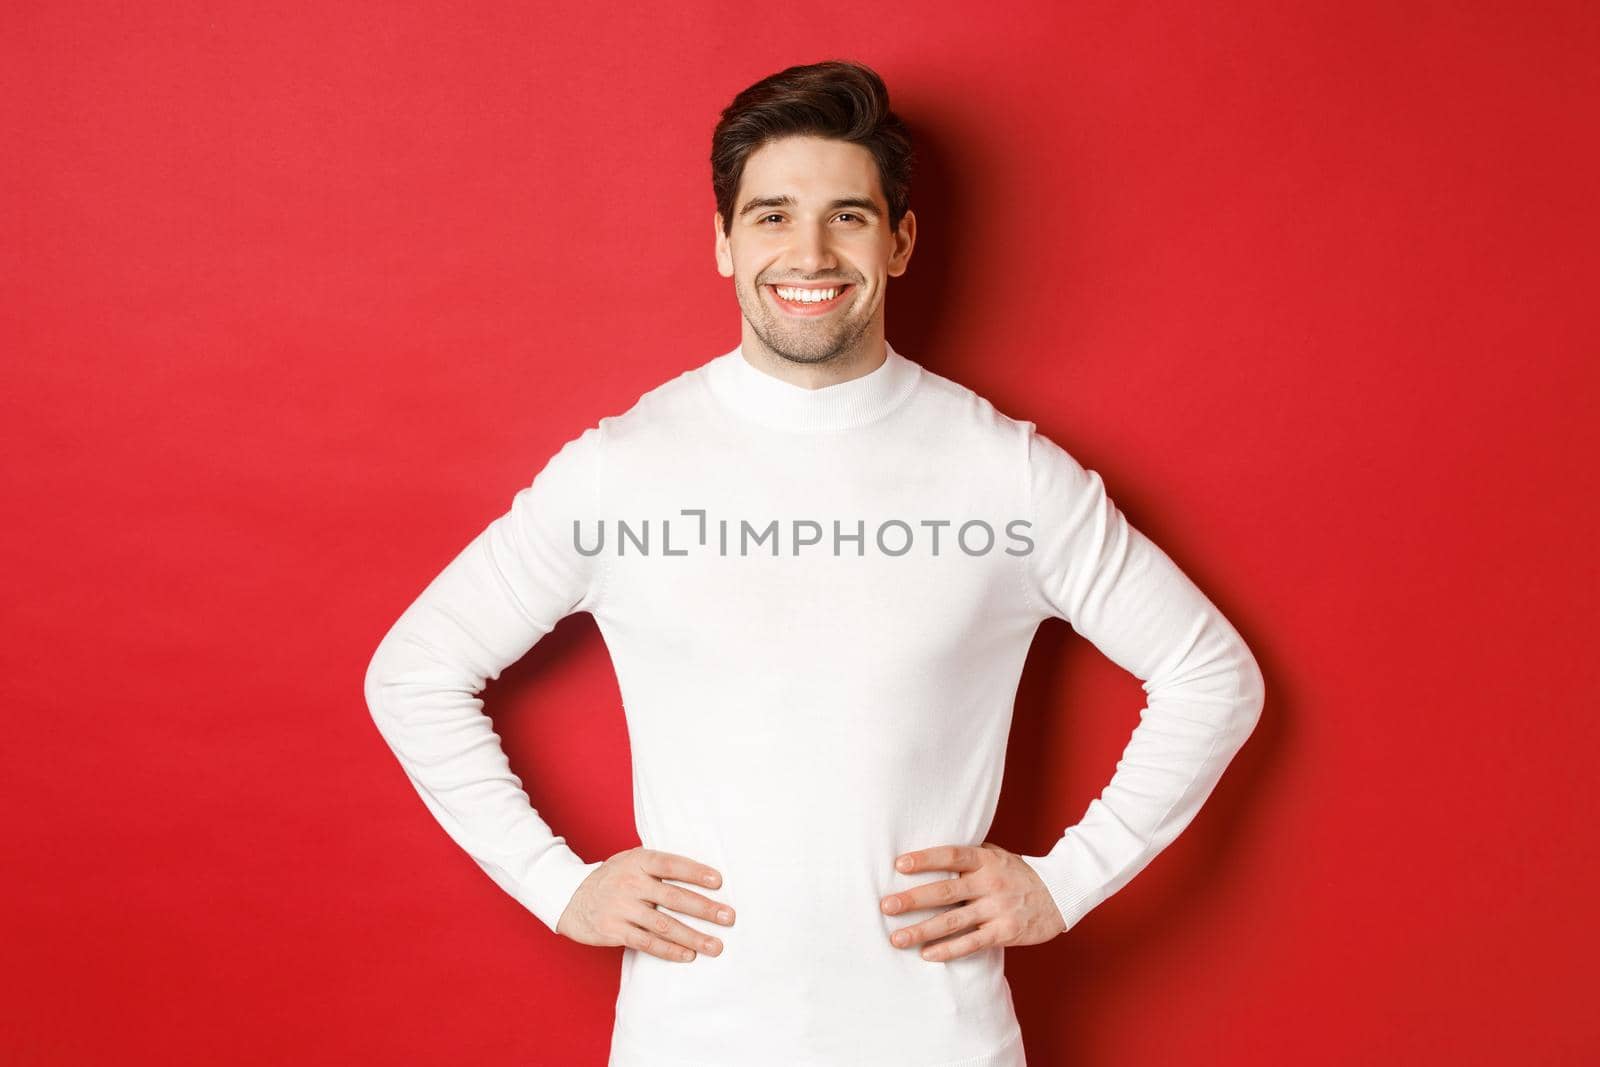 Portrait of handsome man with bristle, wearing white sweater, smiling and looking confident, standing against red background. Concept of new year and winter holidays